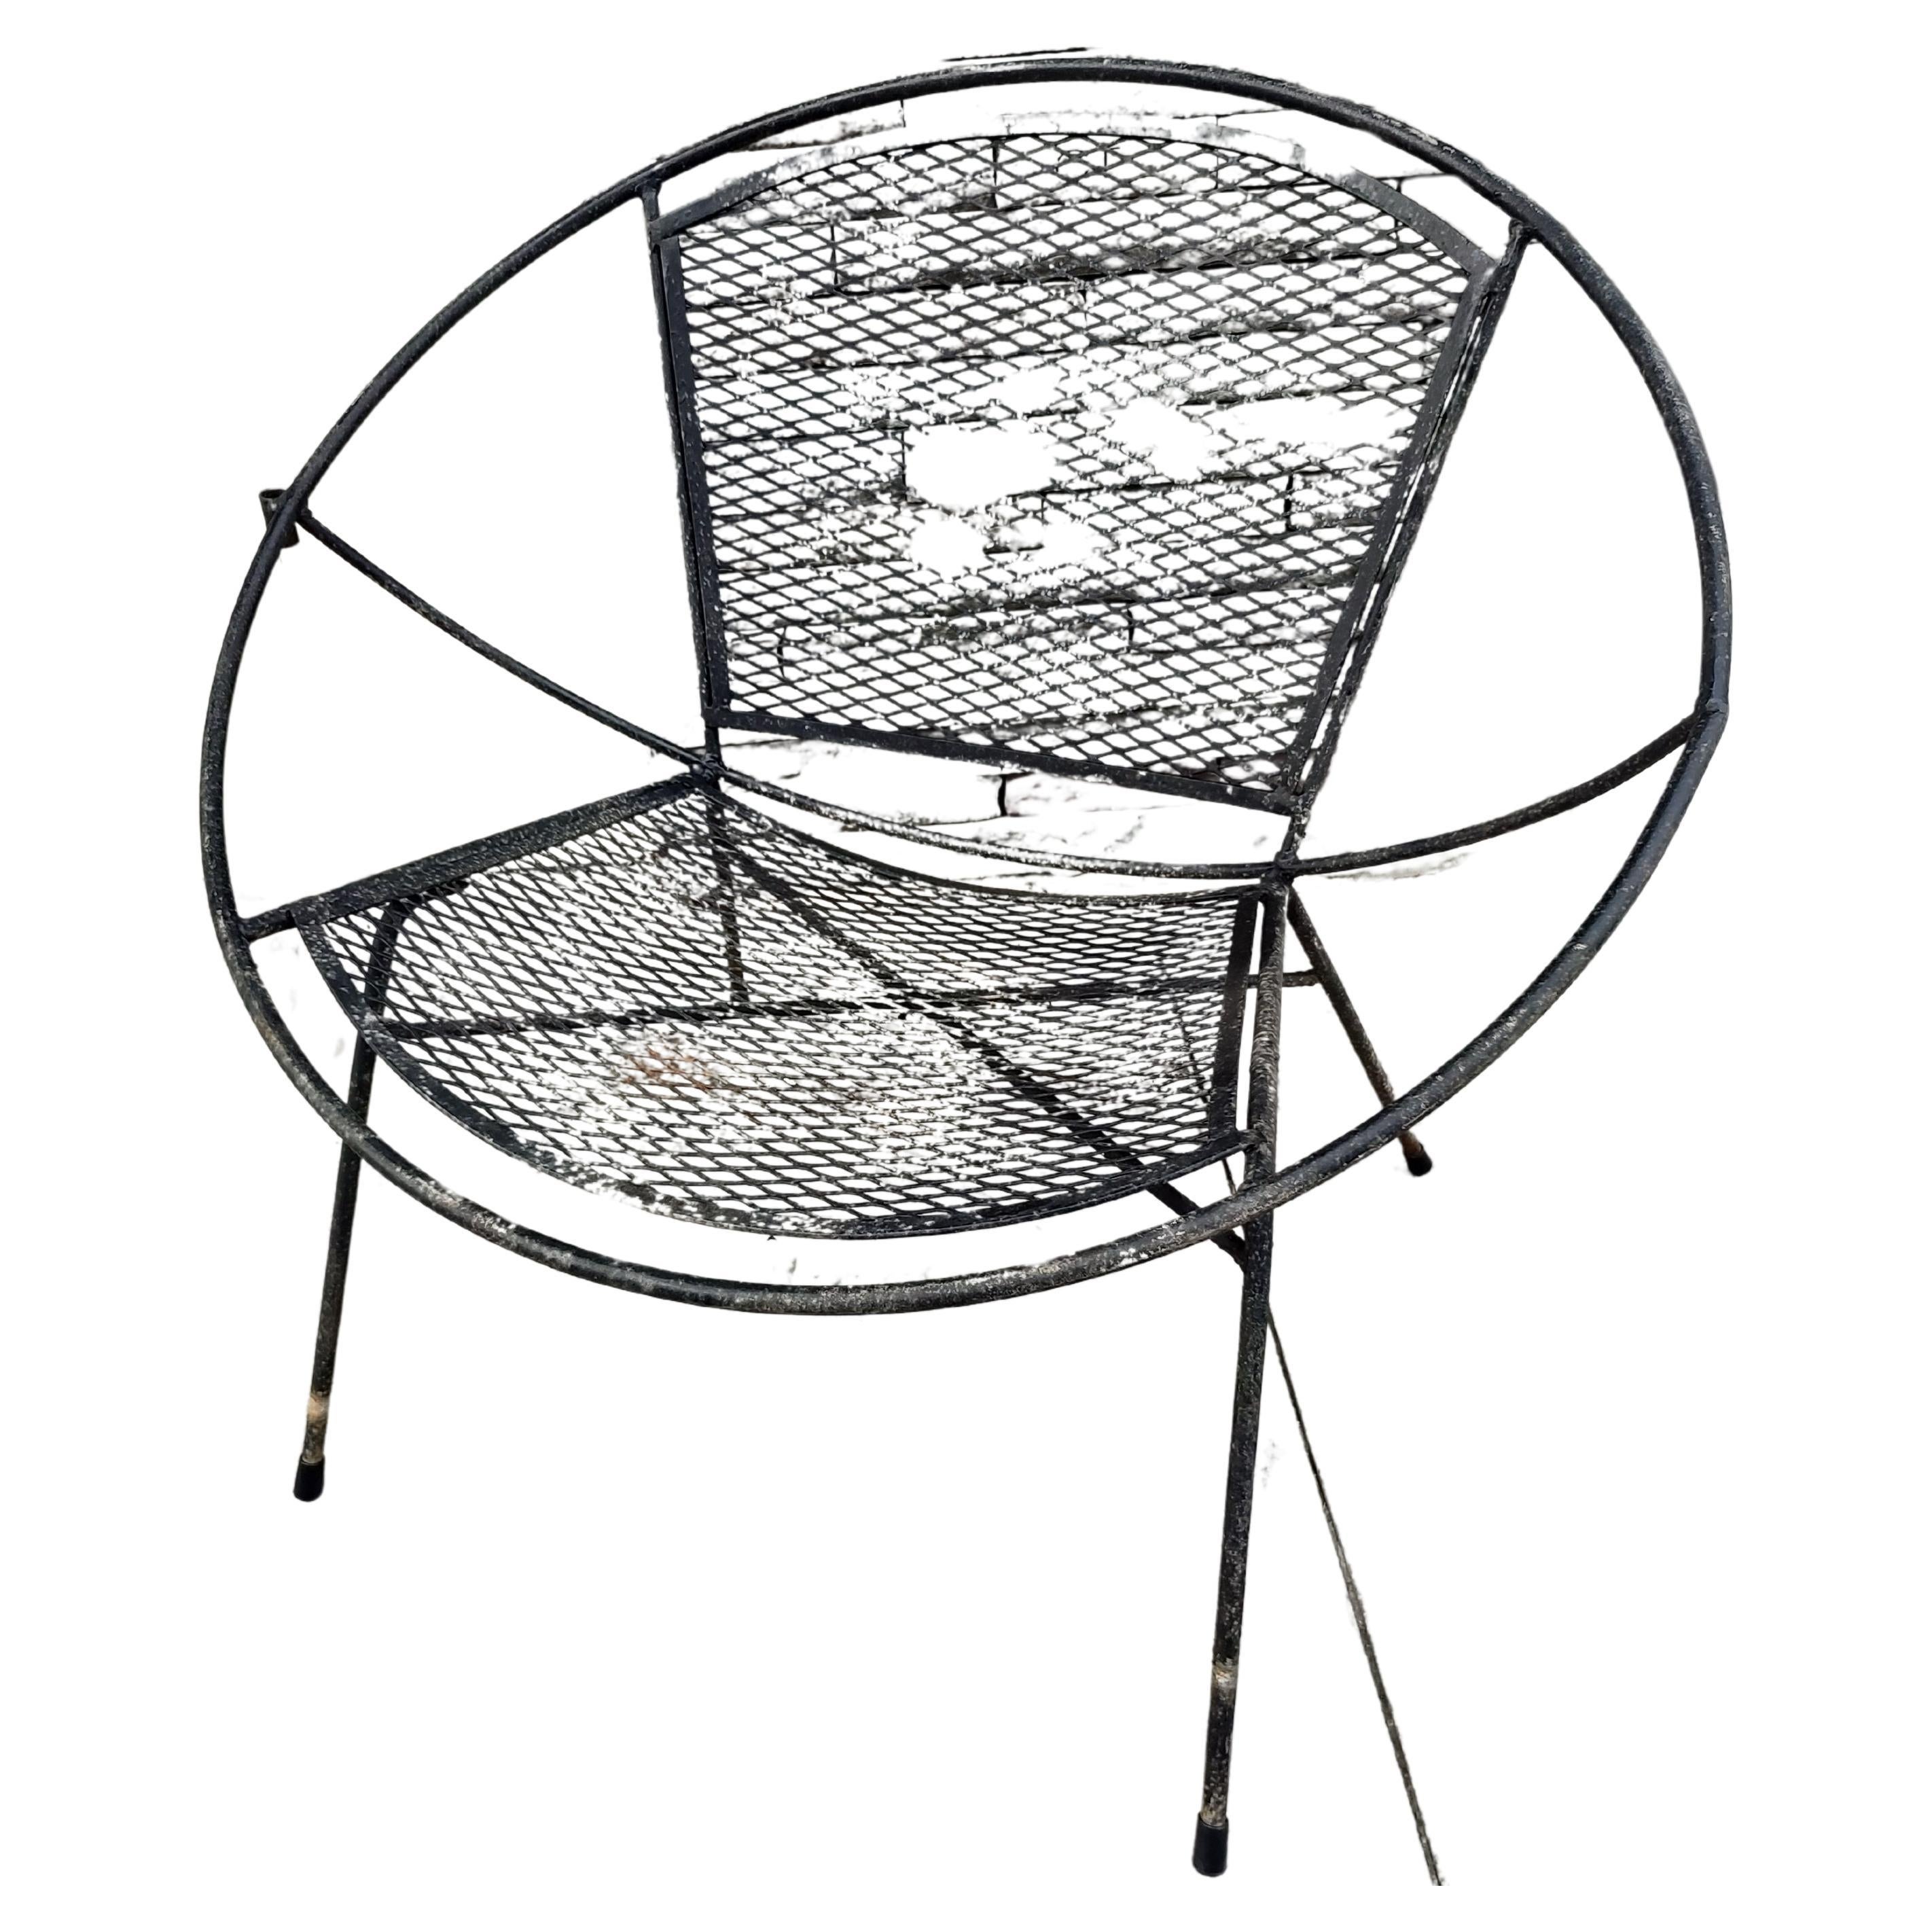 Fabulous iron hoop chair designed by Maurizio Tempestini for Salterini c1955. In very good condition needing a spray job. New plastic feet glides. Possible to parcel post this chair.